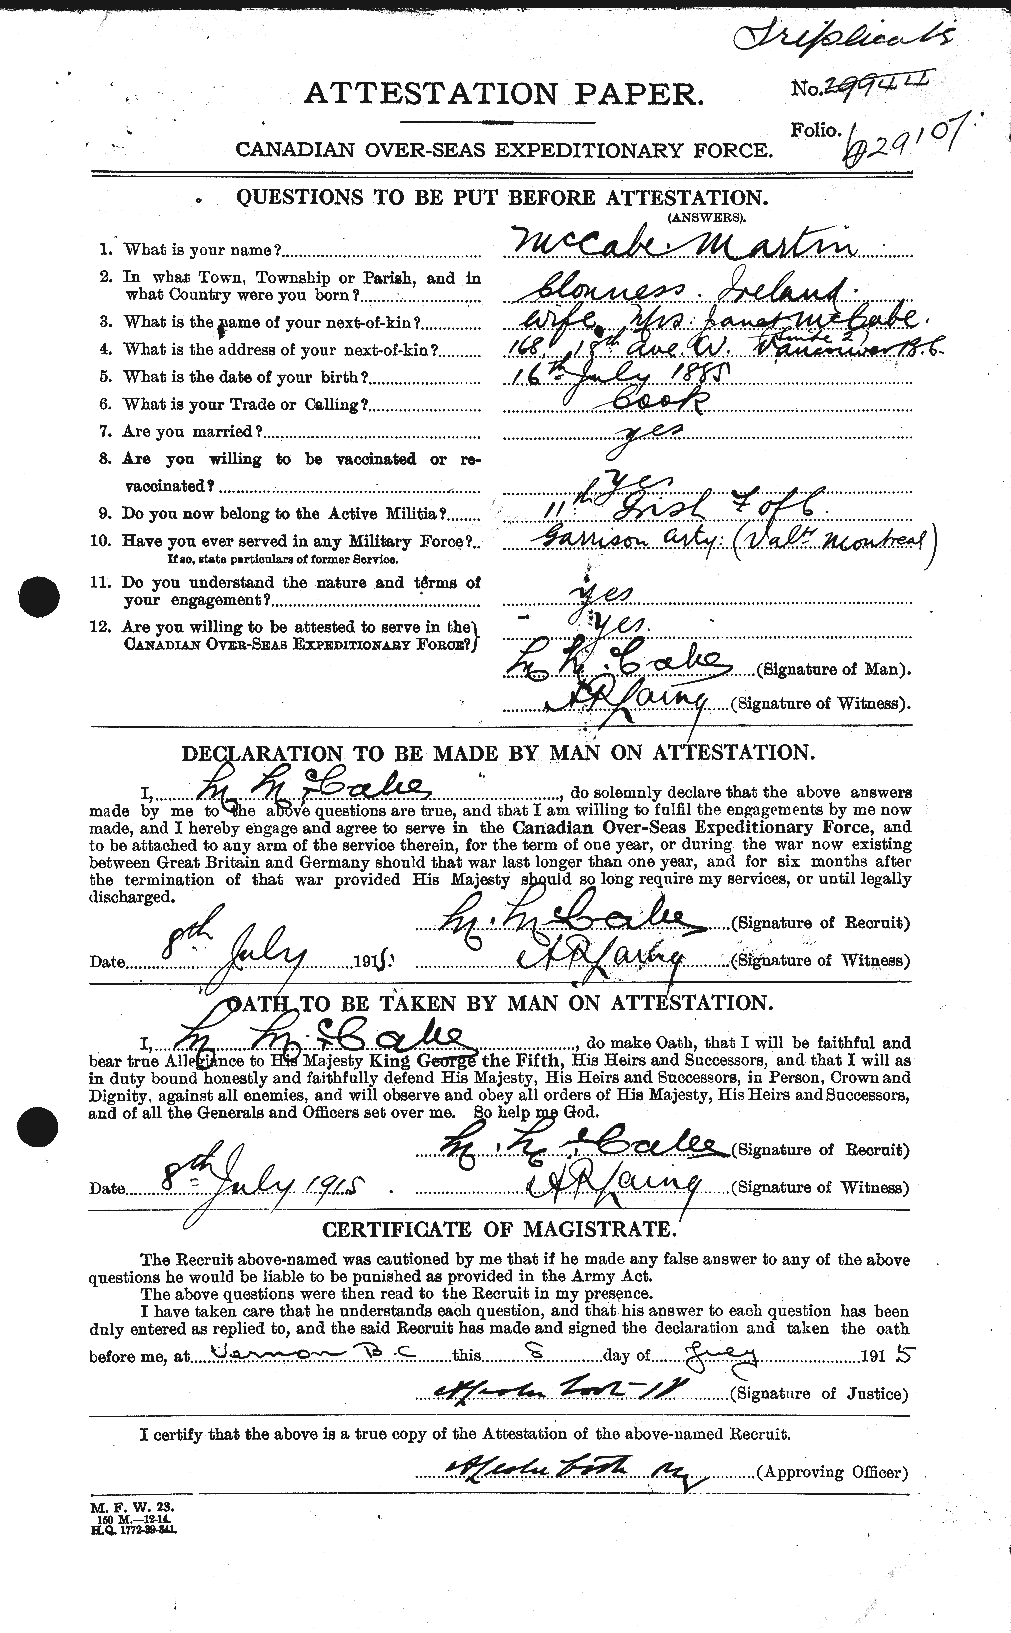 Personnel Records of the First World War - CEF 131229a